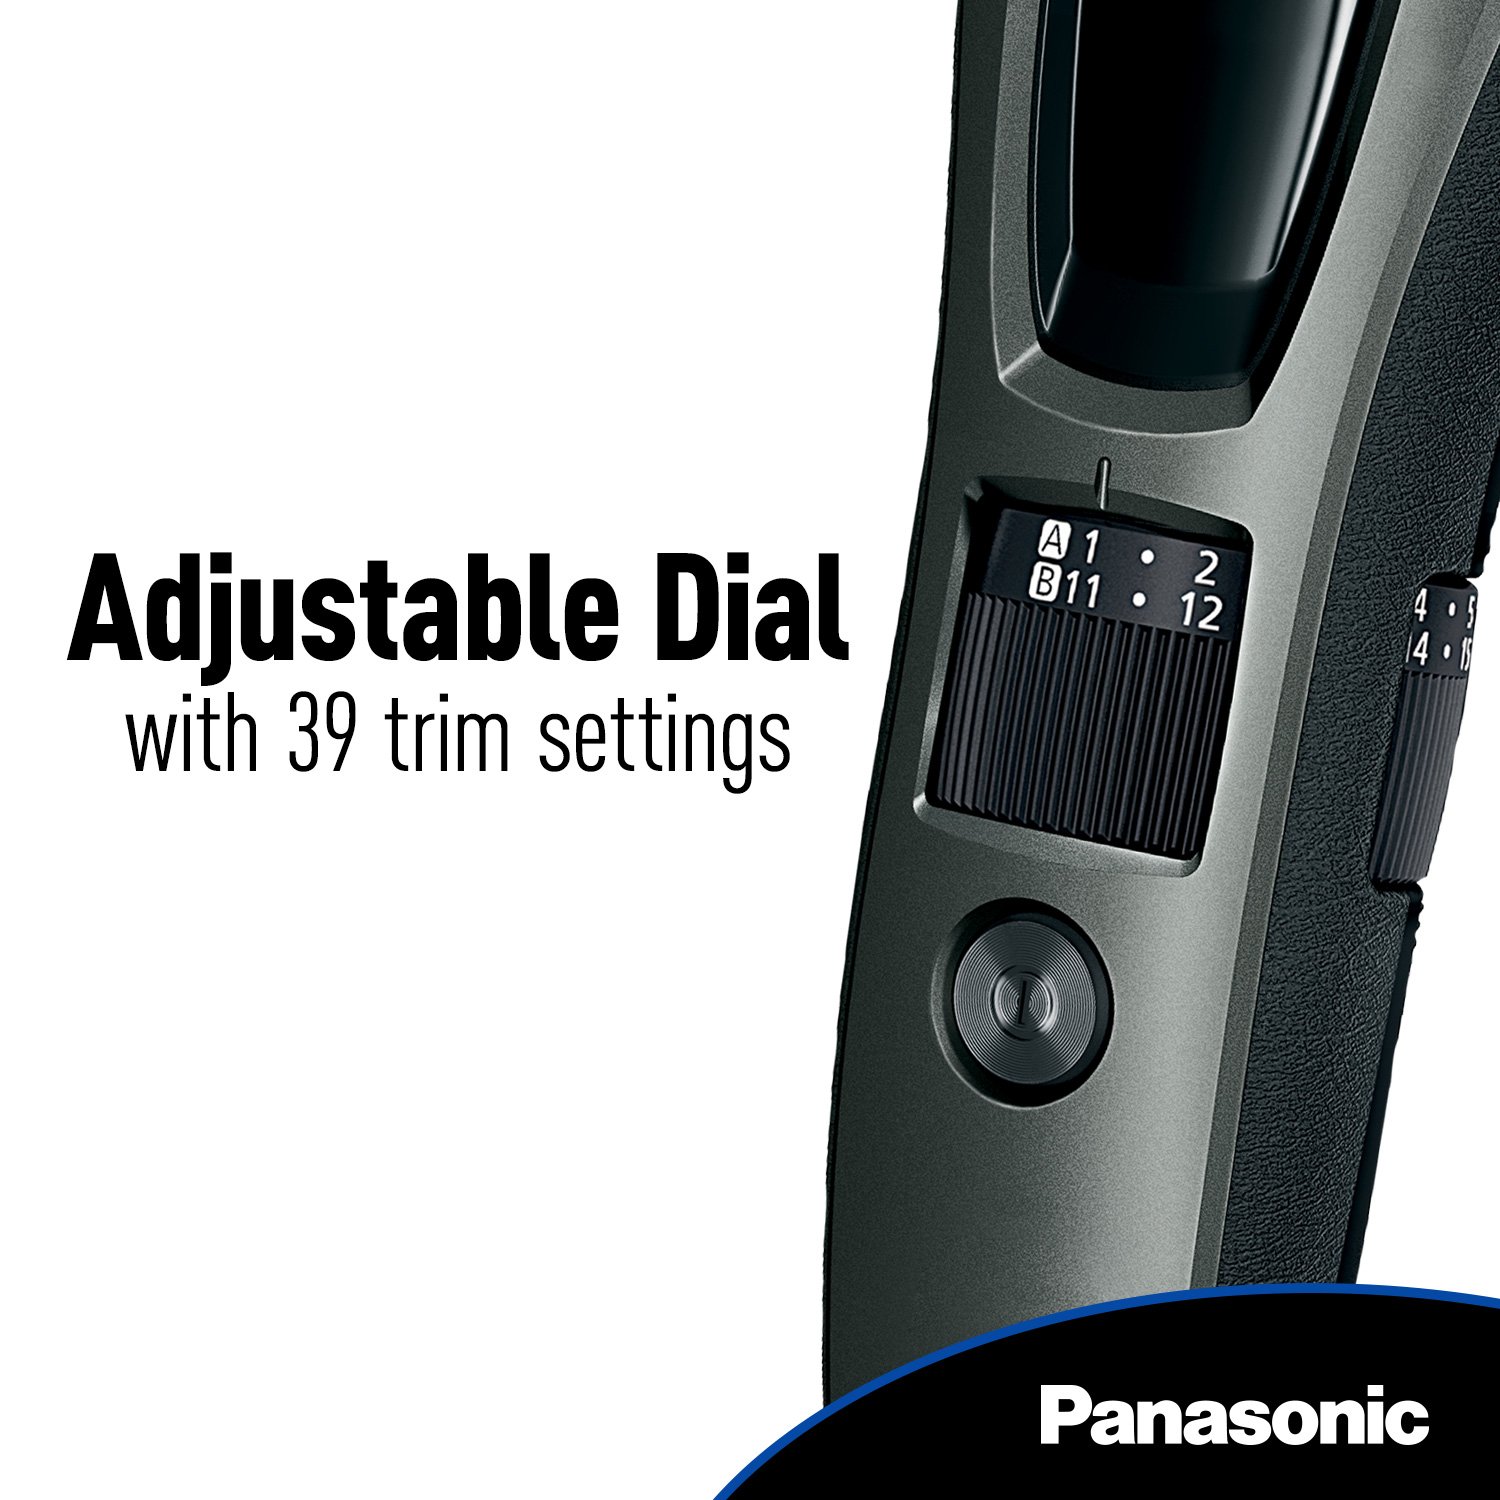 Panasonic Hair and Beard Trimmer, Men's, with 39 Adjustable Trim Settings and Two Comb Attachments for Beard and Hair, Corded or Cordless Operation, ER-GB60-K, Black